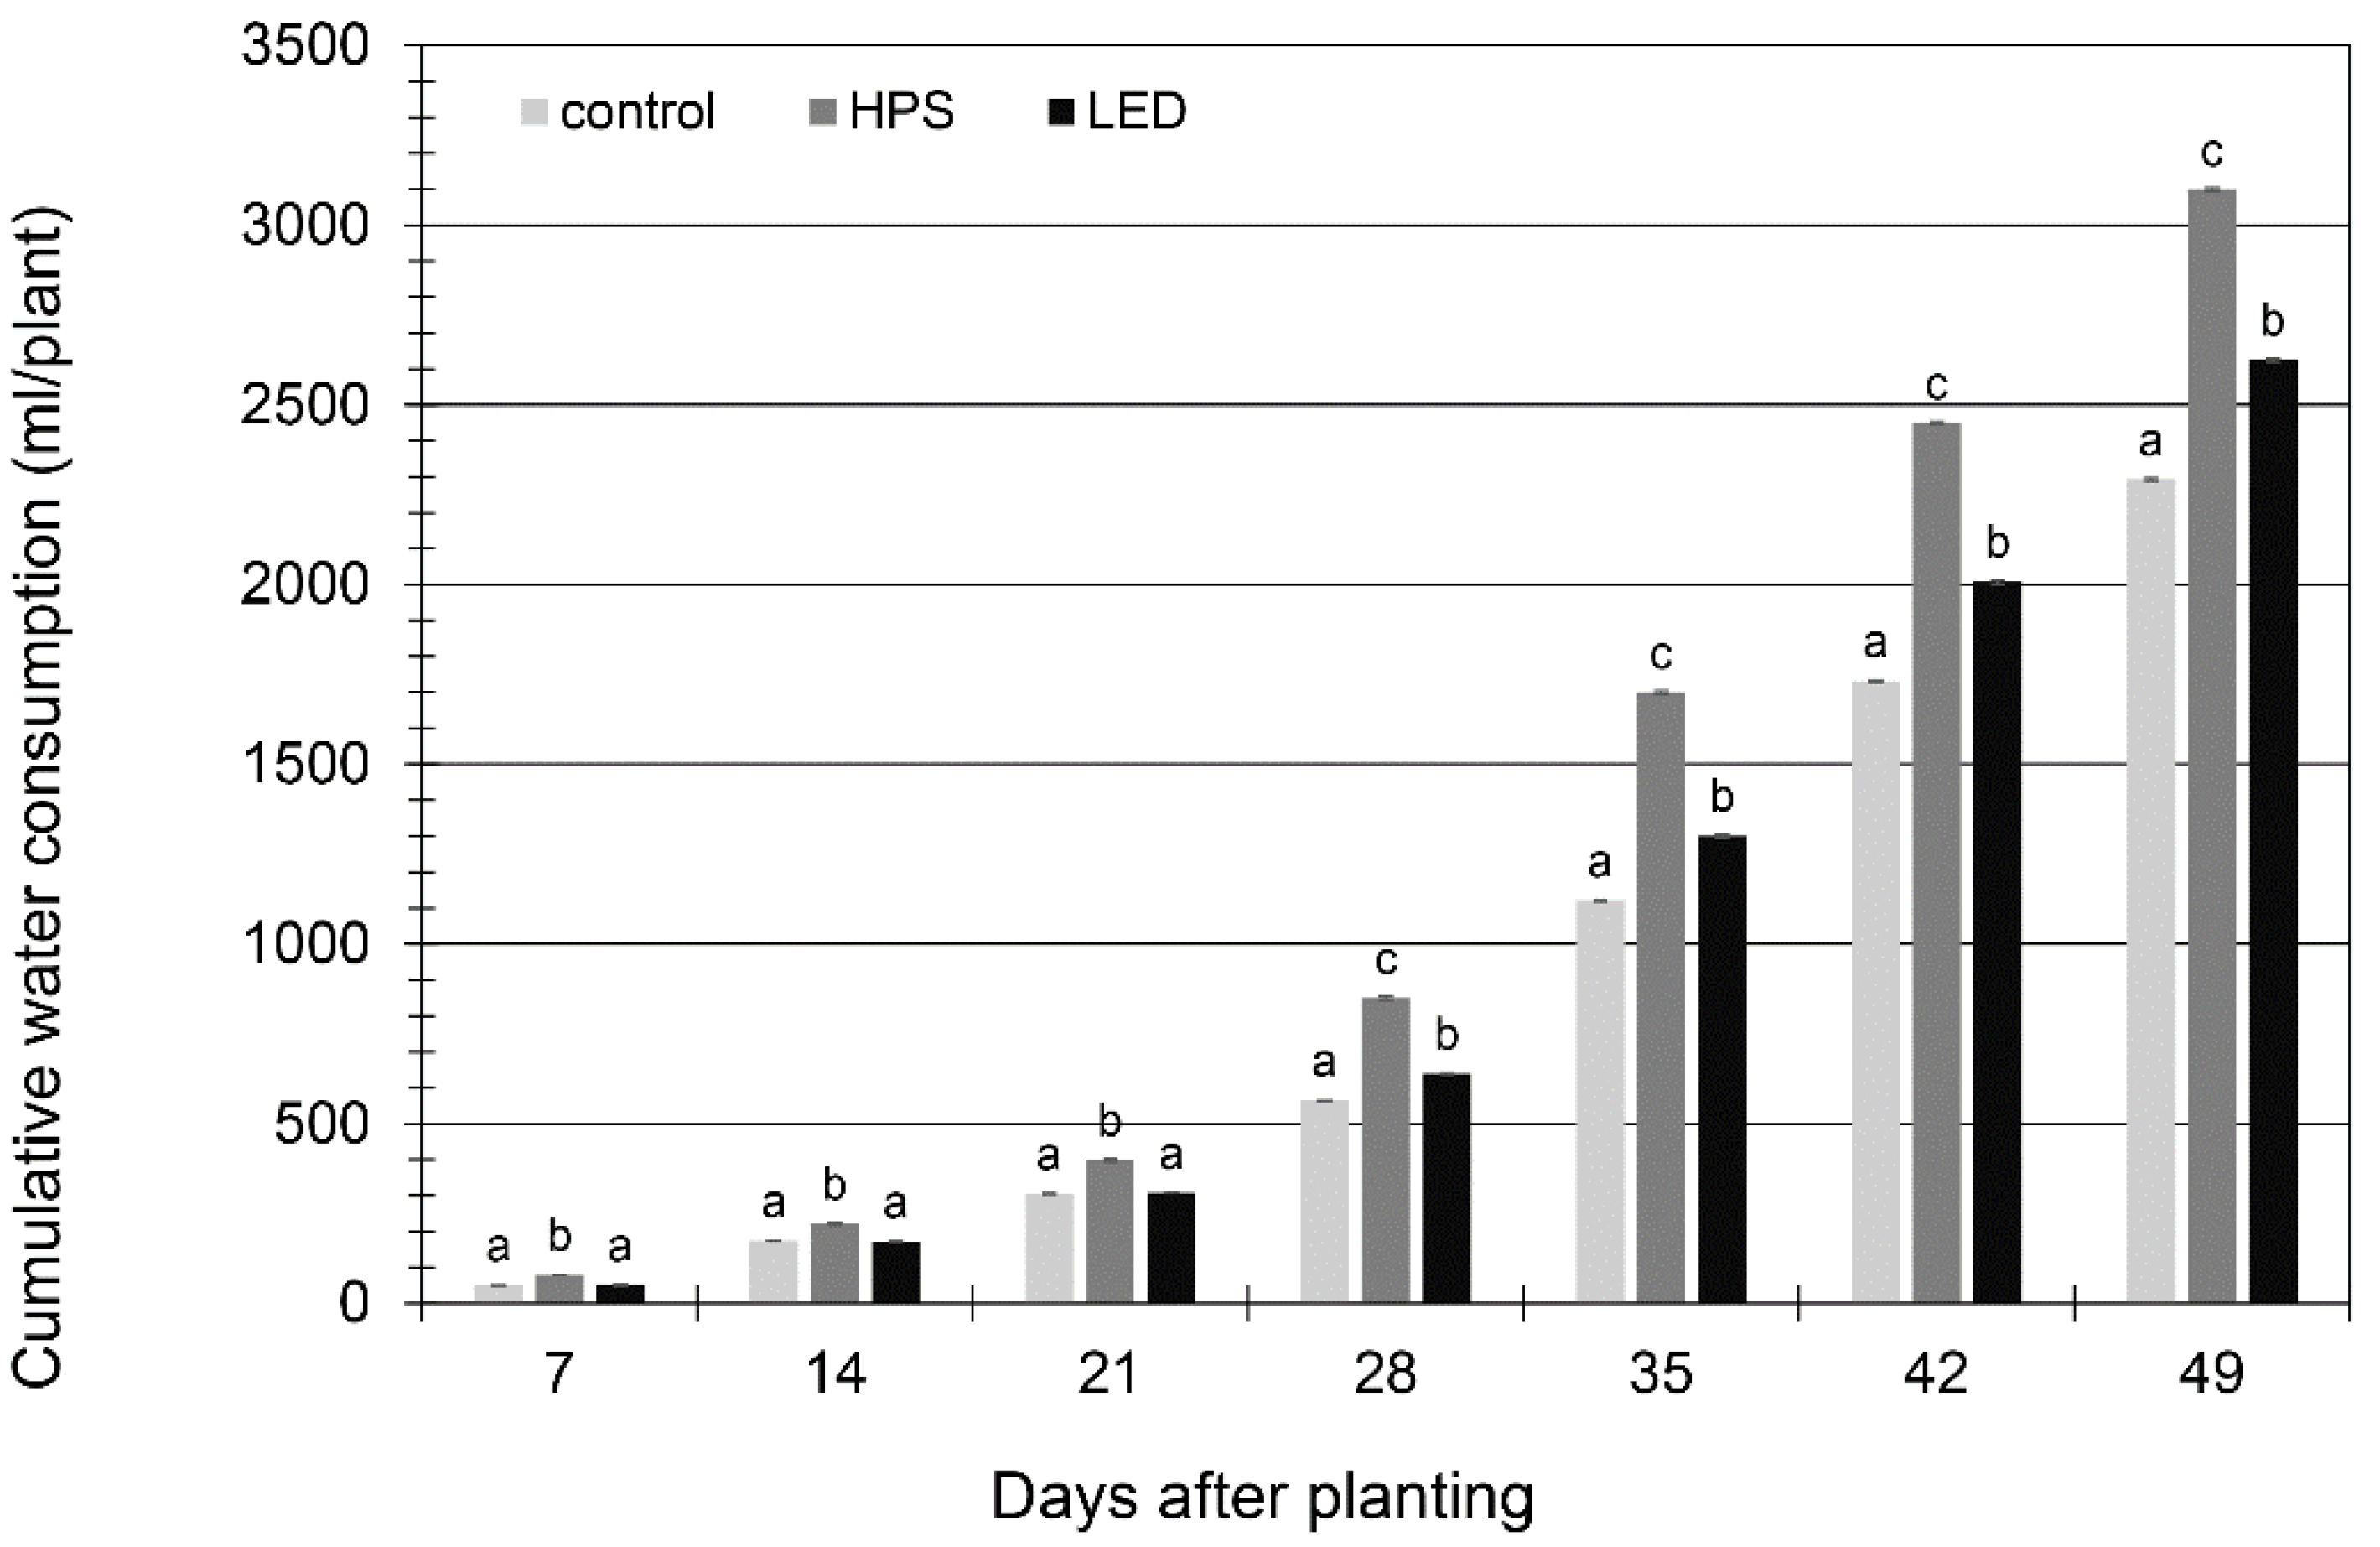 Sustainability | Free Full-Text | LED versus HPS Lighting: Effects on Water  and Energy Consumption and Yield Quality in Lettuce Greenhouse Production